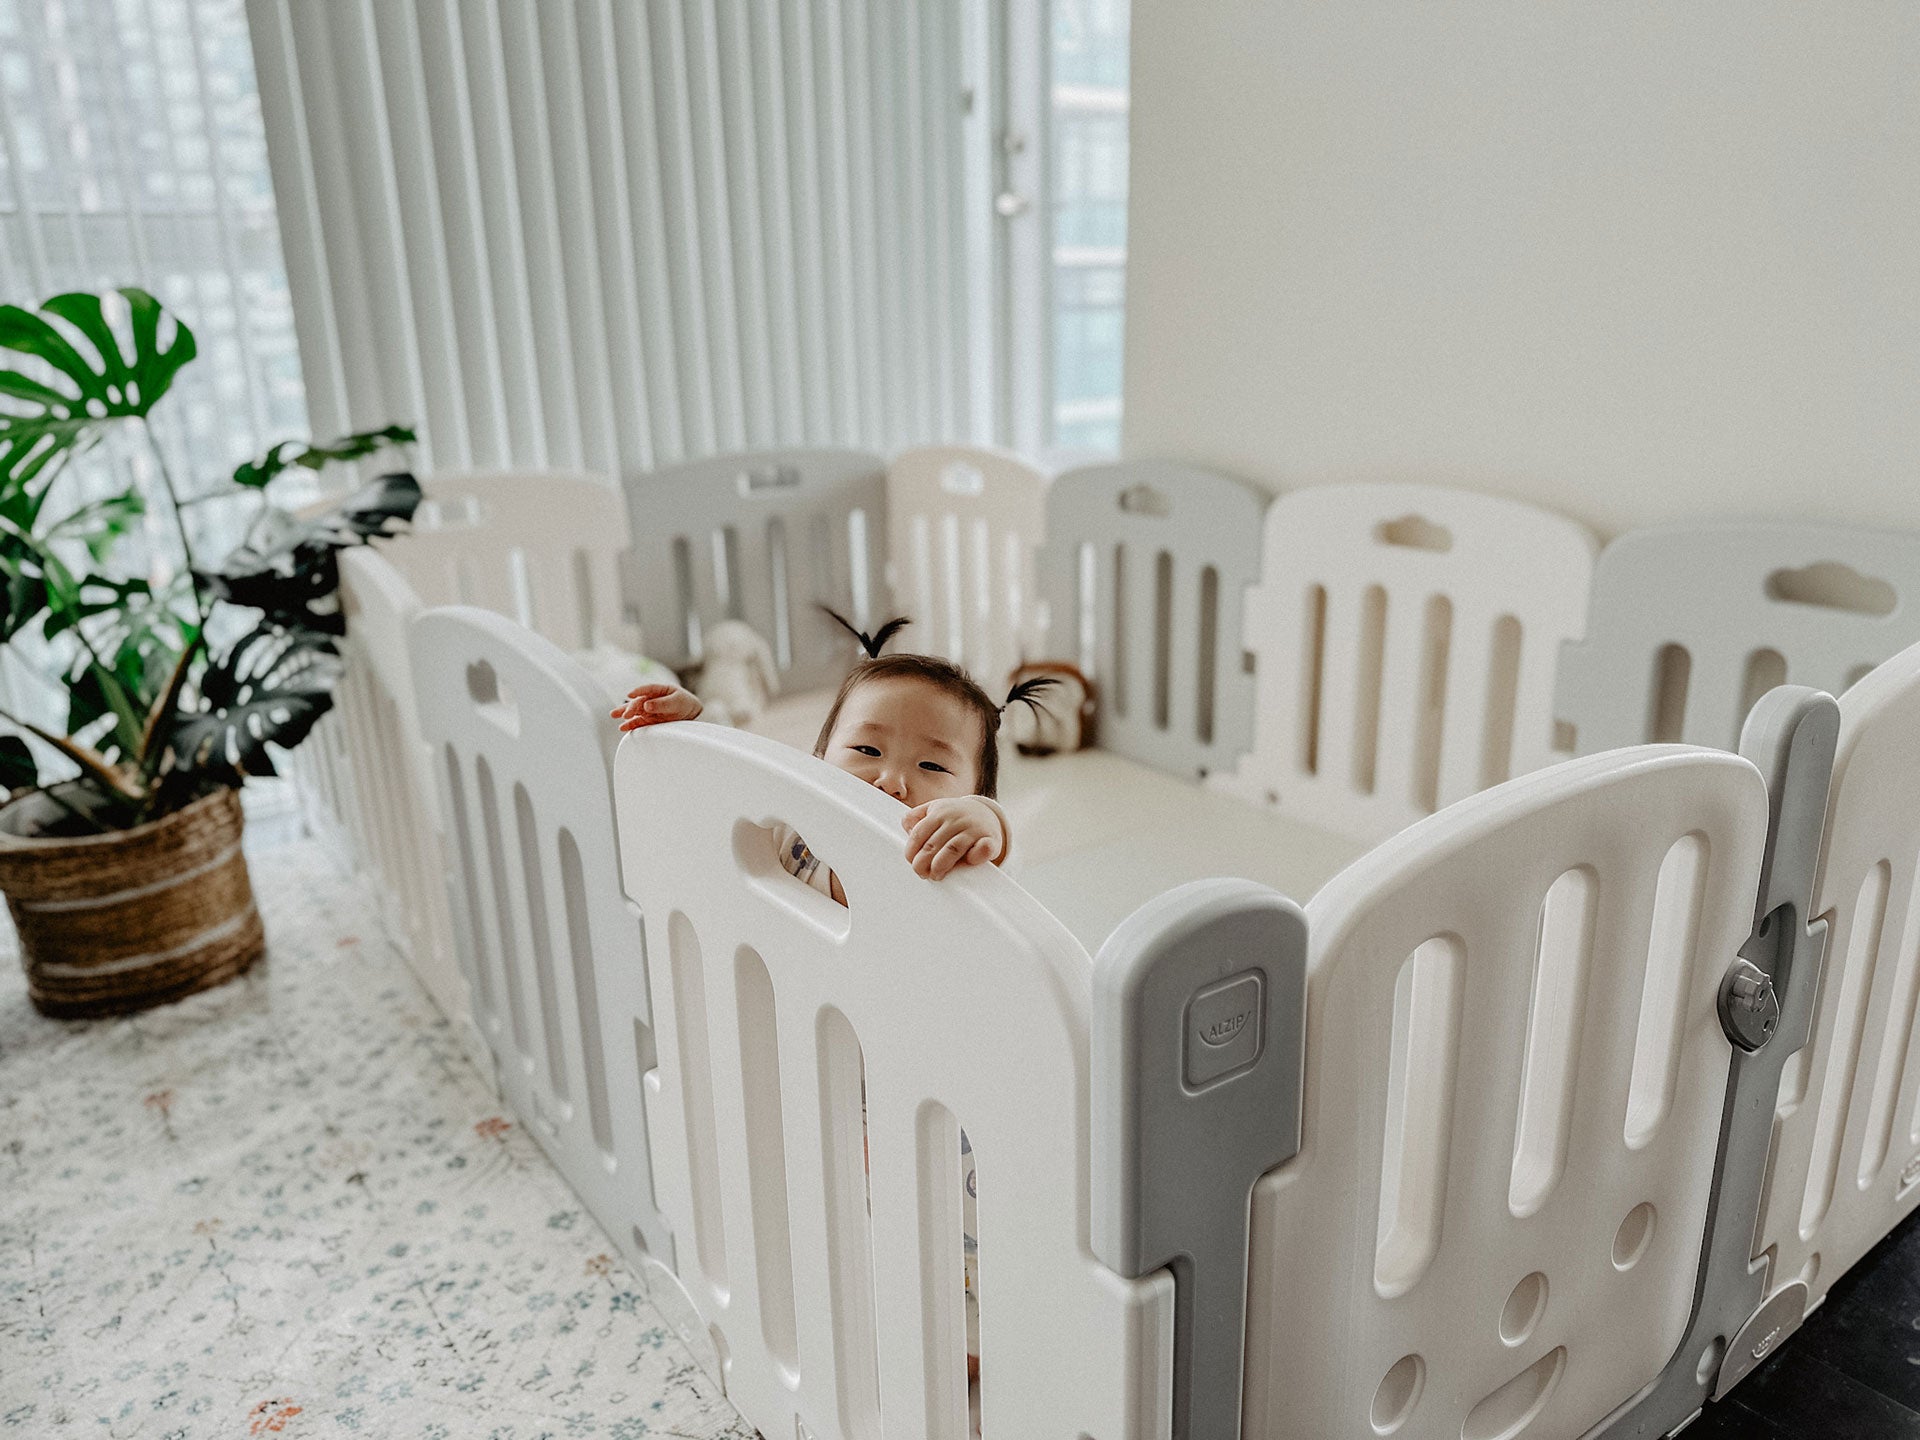 How to Set Up, Clean, and Close a Playpen